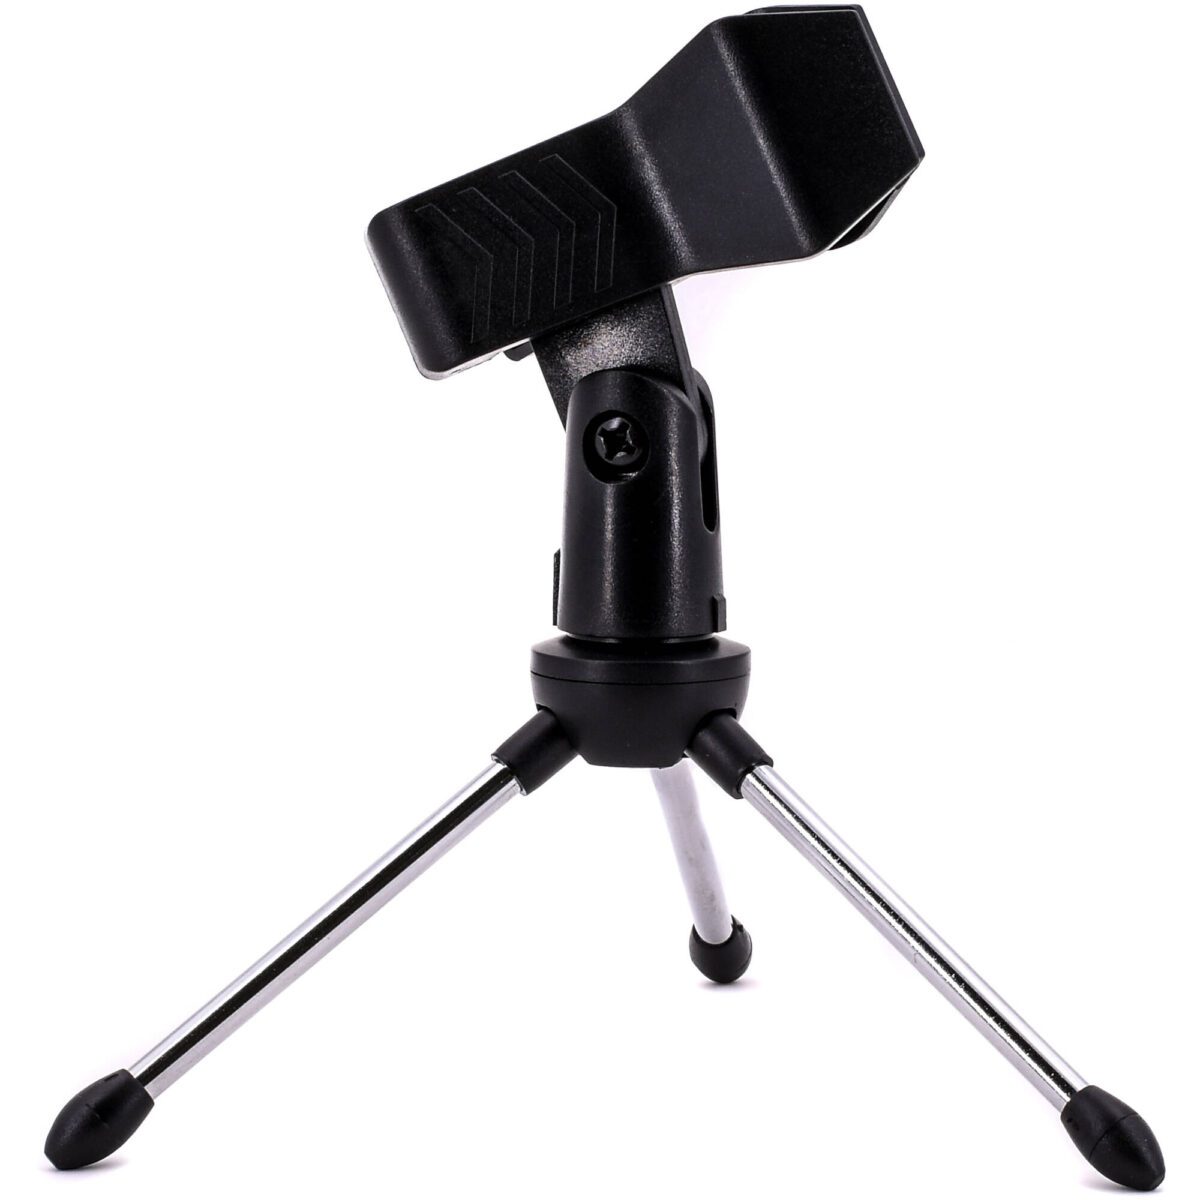 Key Features For Quality, Budget-Conscious Recording Record Straight to Computers over USB Cardioid Polar Pattern Minimizes Room Quality 44.1 kHz/16-Bit Audio Included Tripod Stand & Mounting Clip Included USB Cable & Foam Windscreen